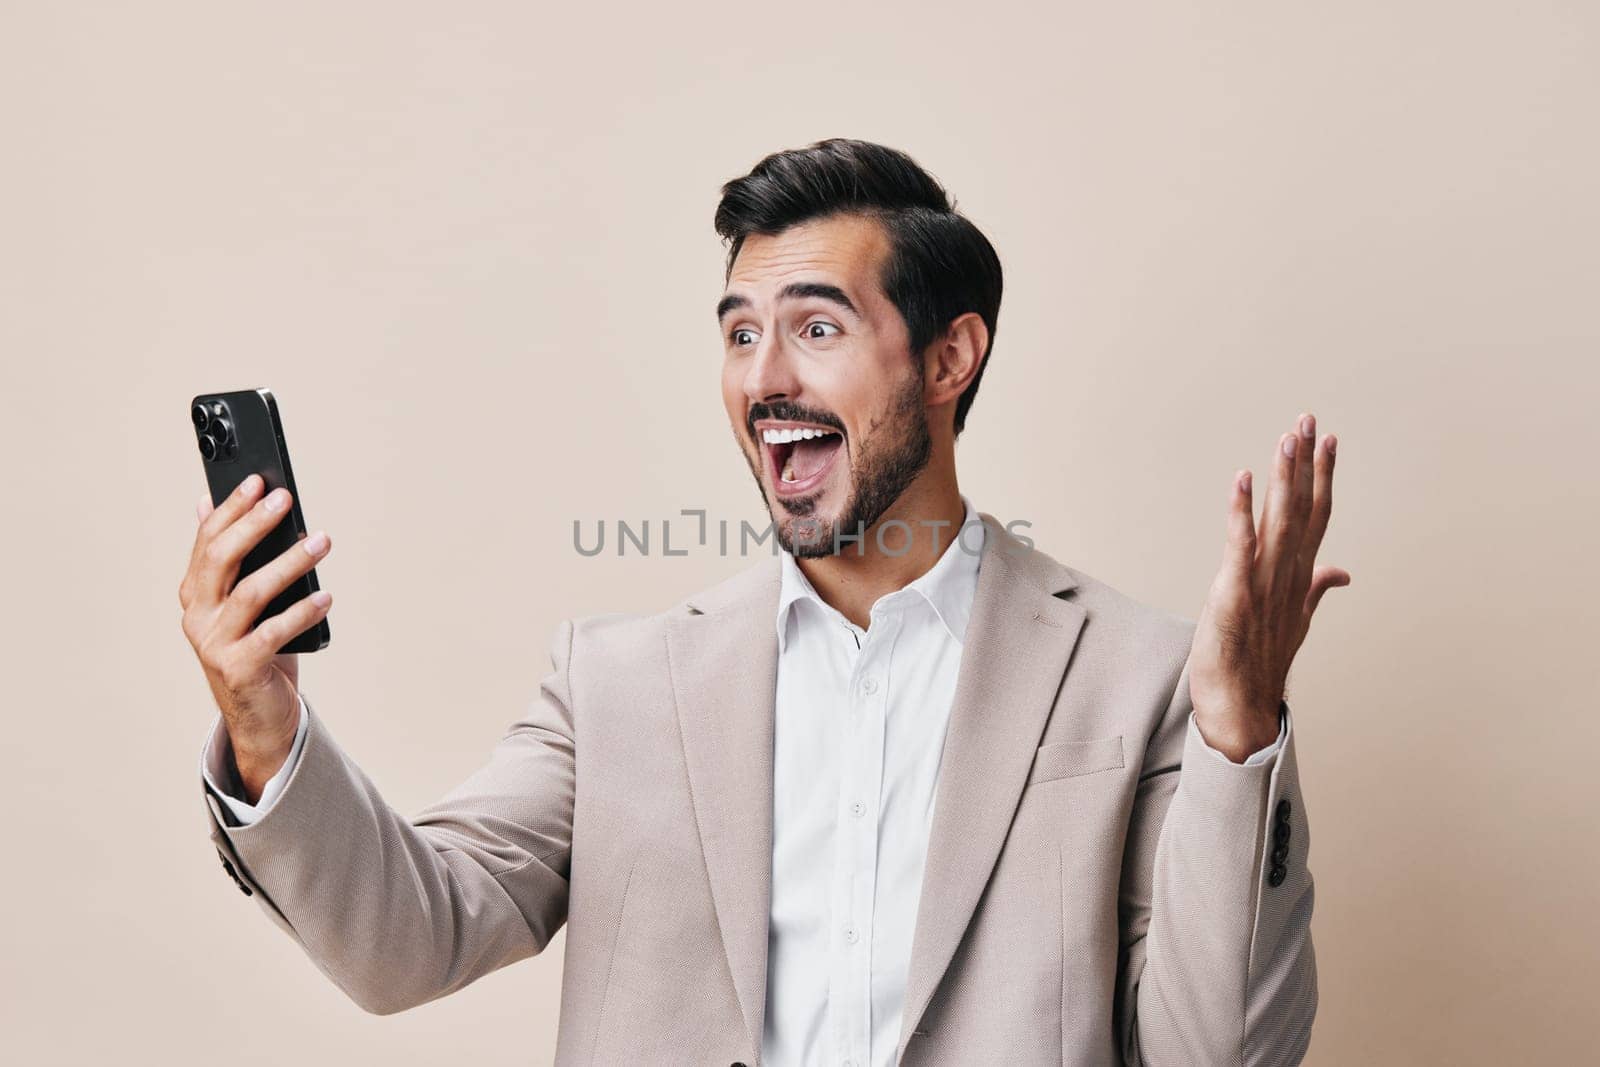 man happy businessman success cellphone phone gray call young trading hold smartphone mobile connection internet suit lifestyle smile cell business portrait